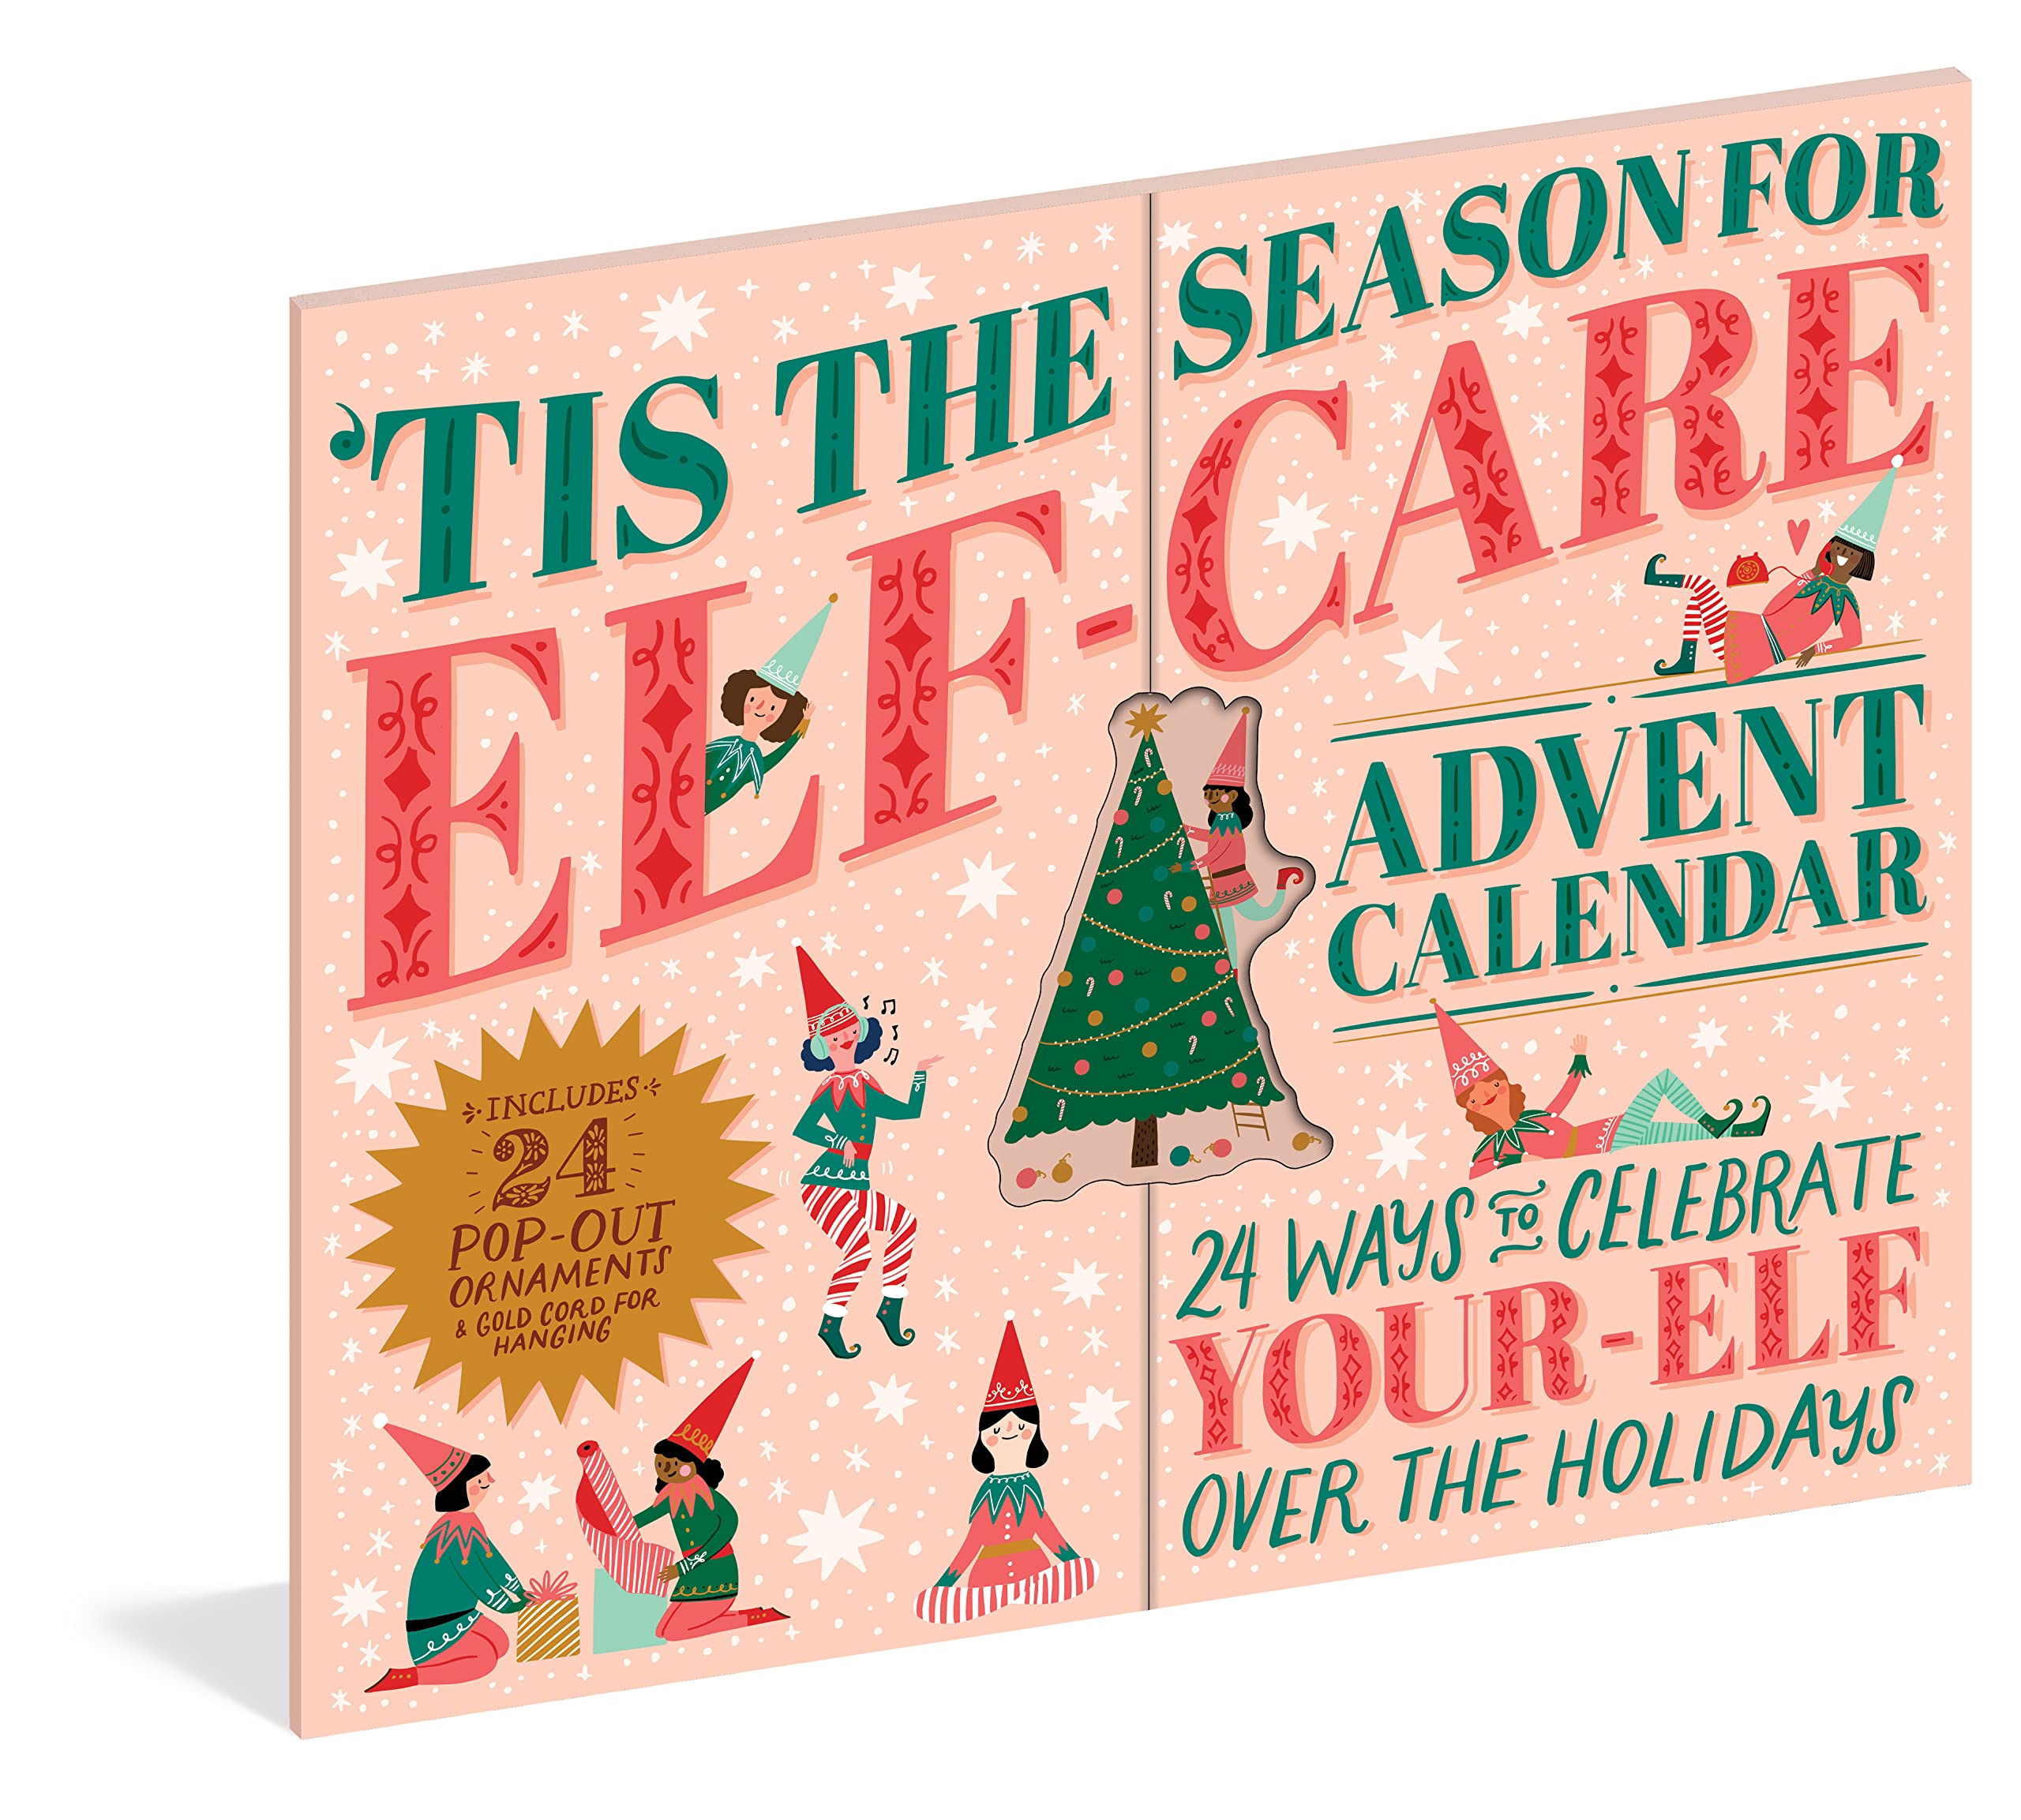 Calendar Advent - 24 Ways to Celebrate Your-Elf Over the Holidays | Workman Publishing Company